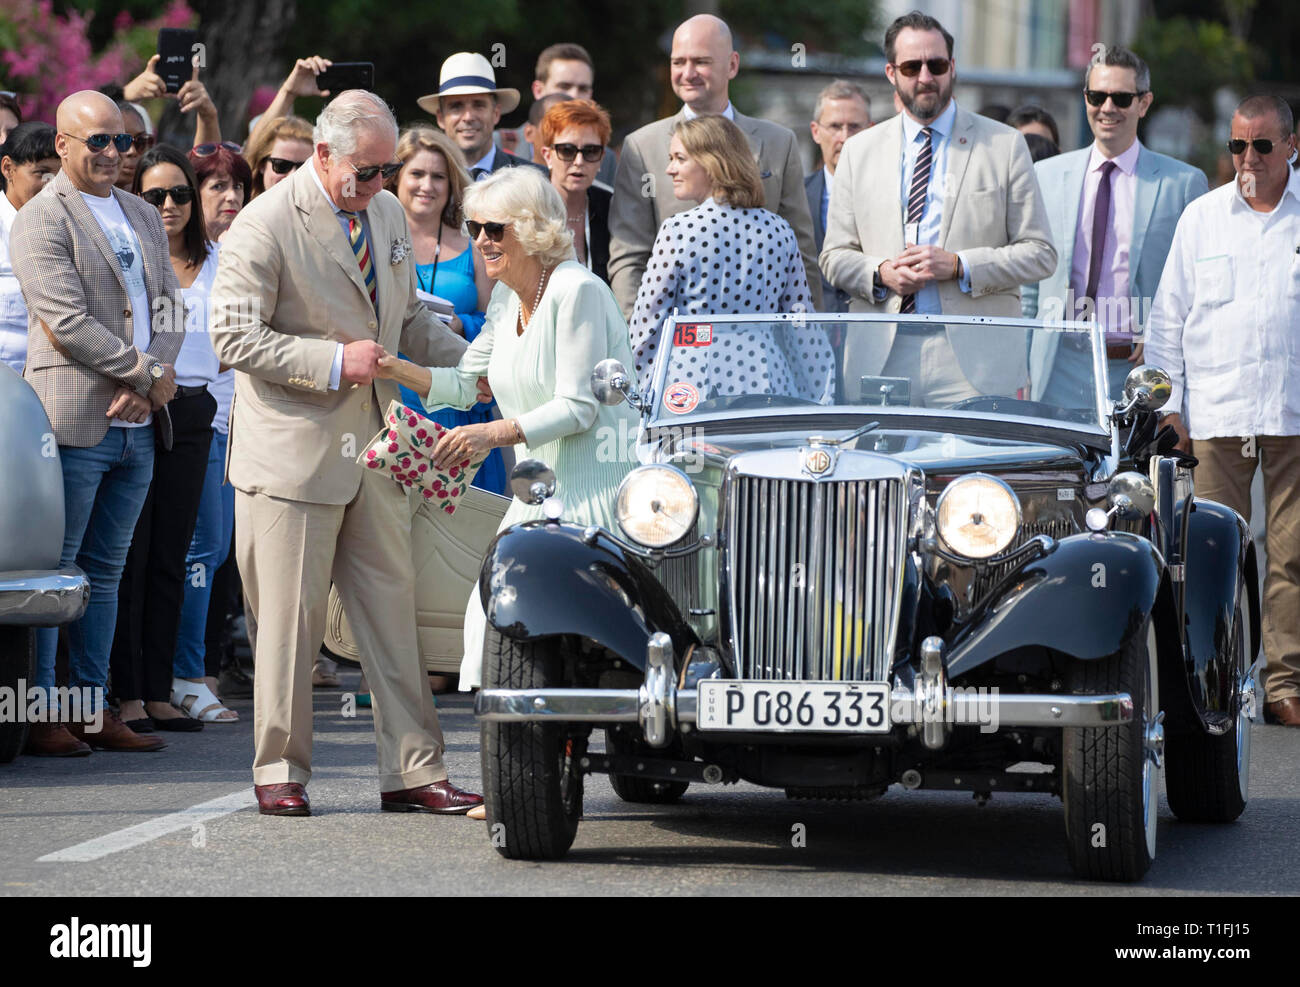 The Prince of Wales helps the Duchess of Cornwall out of an MG TD sportscar from 1953 as they arrive at a British Classic Car event in Havana, Cuba, as part of an historic trip which celebrates cultural ties between the UK and the Communist state. Stock Photo